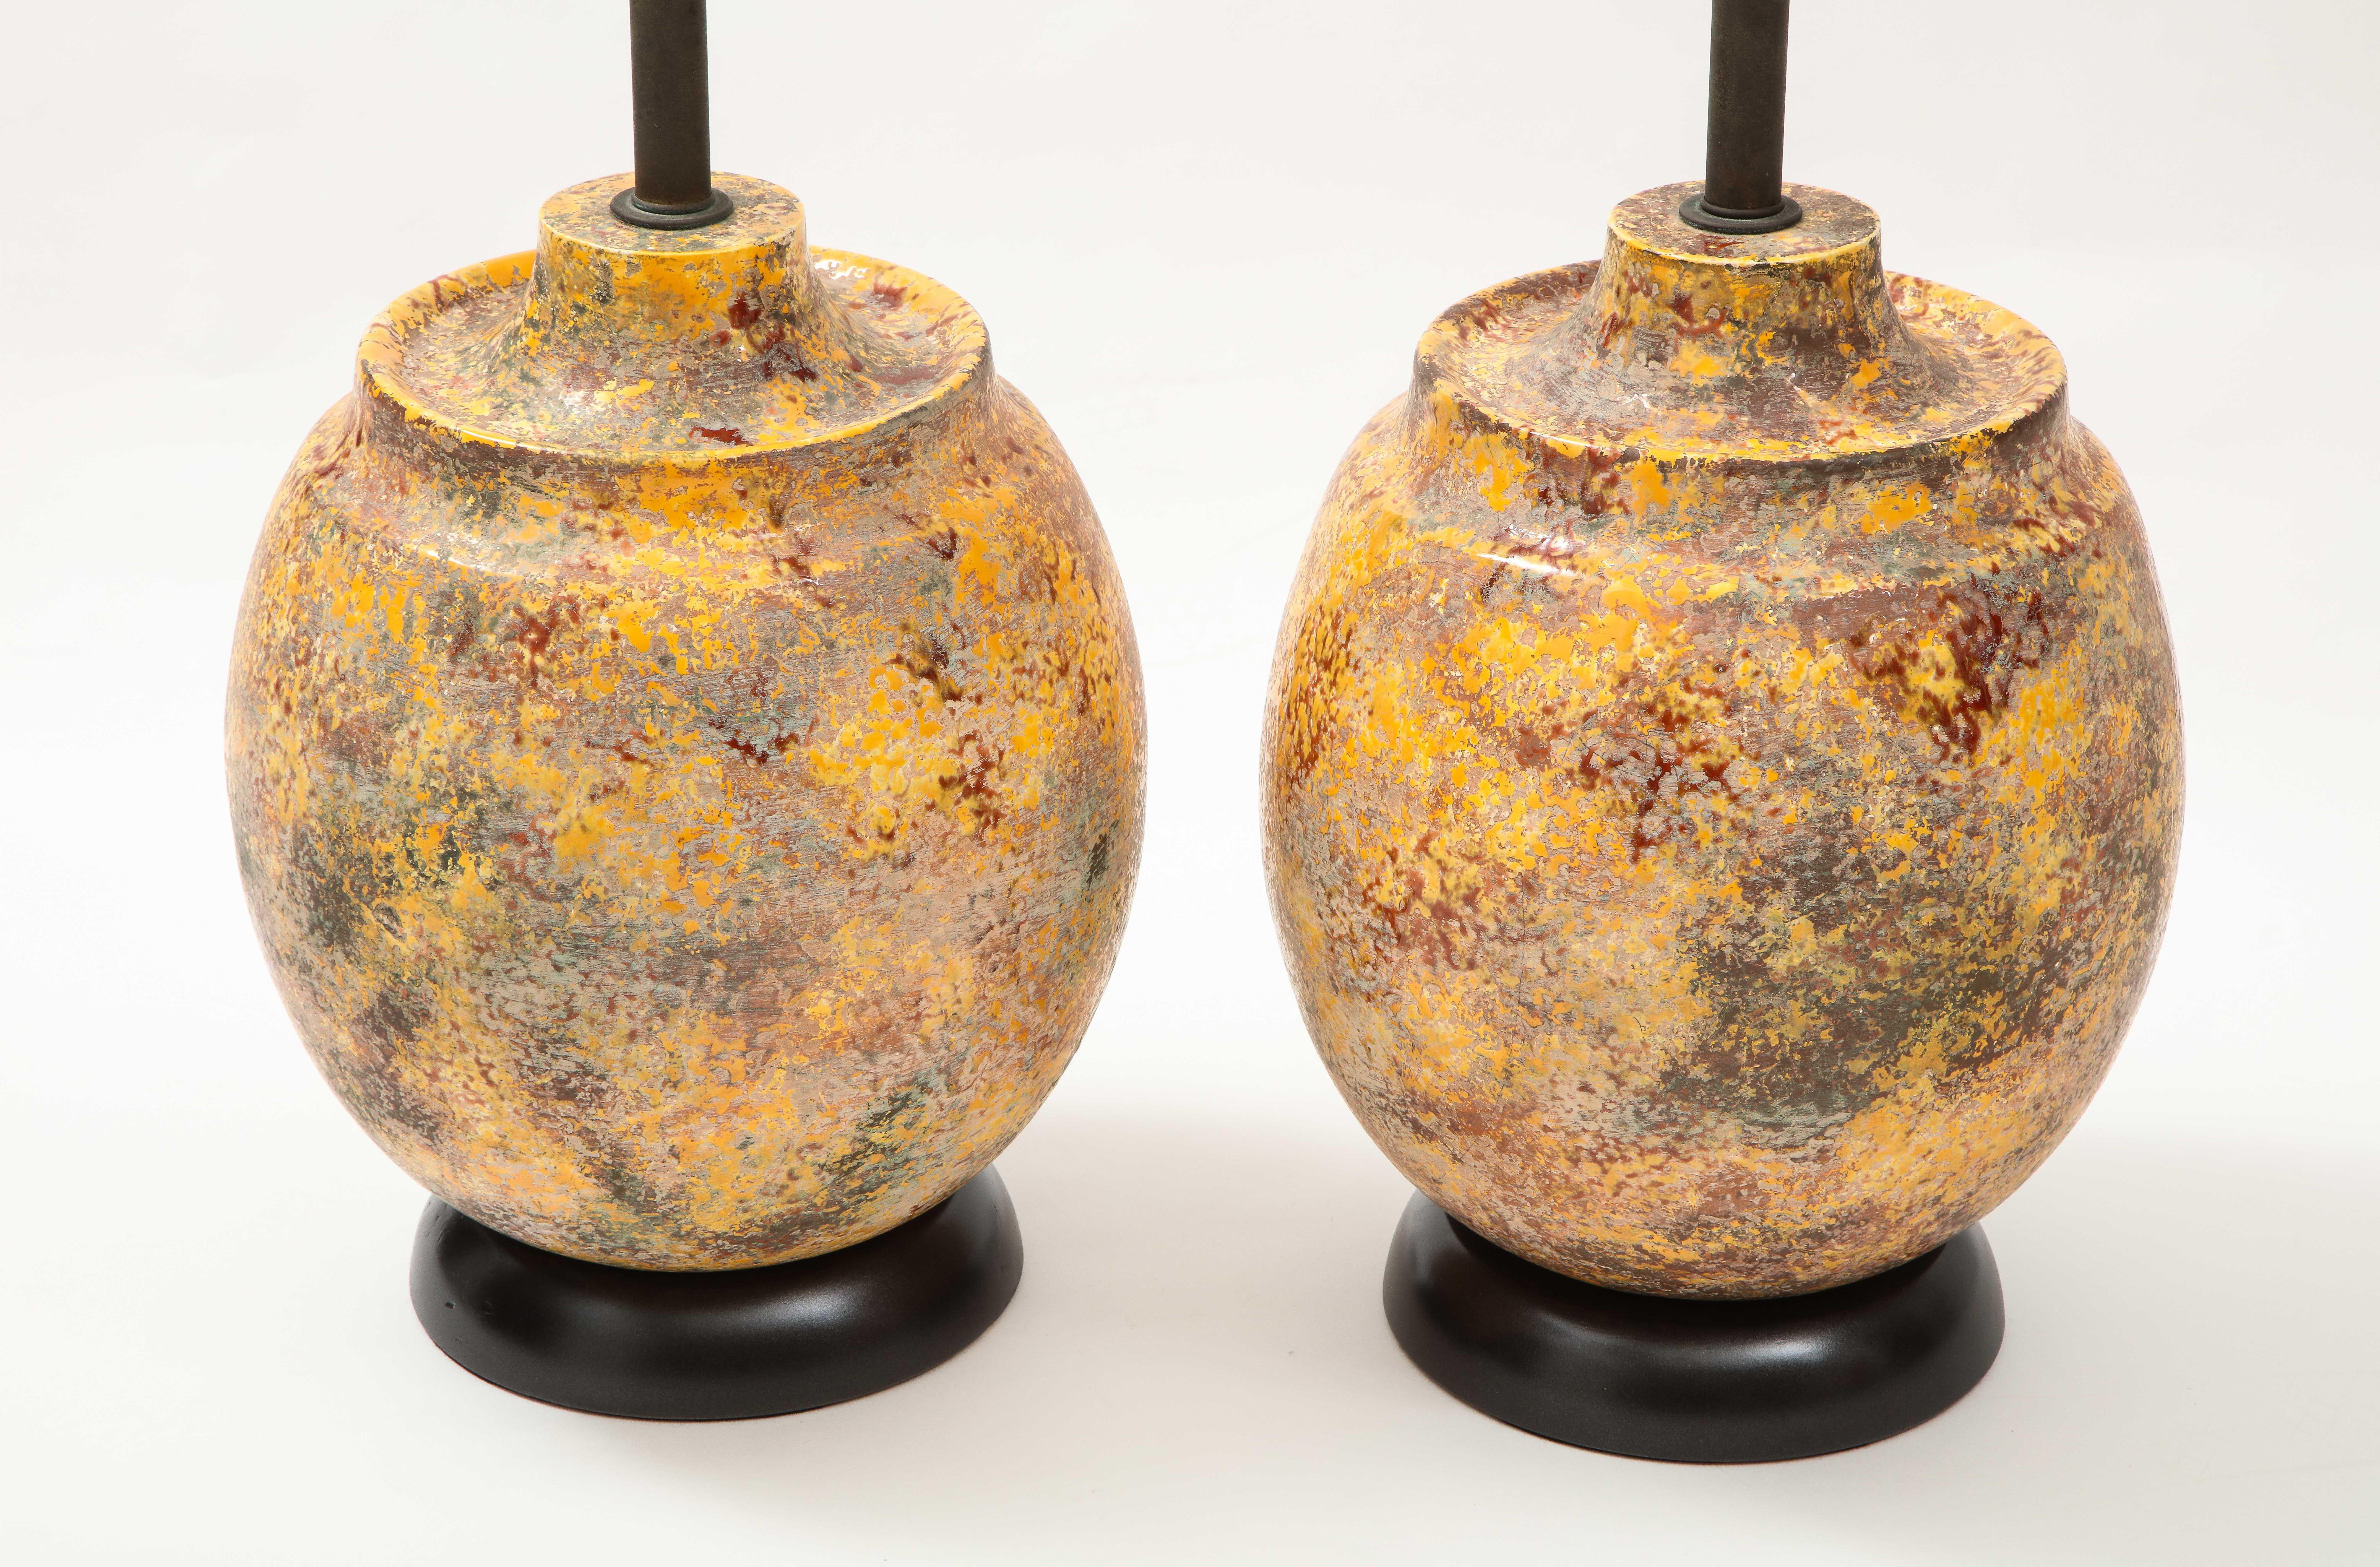 Pair of Large Italian Ceramic Lamps with a 